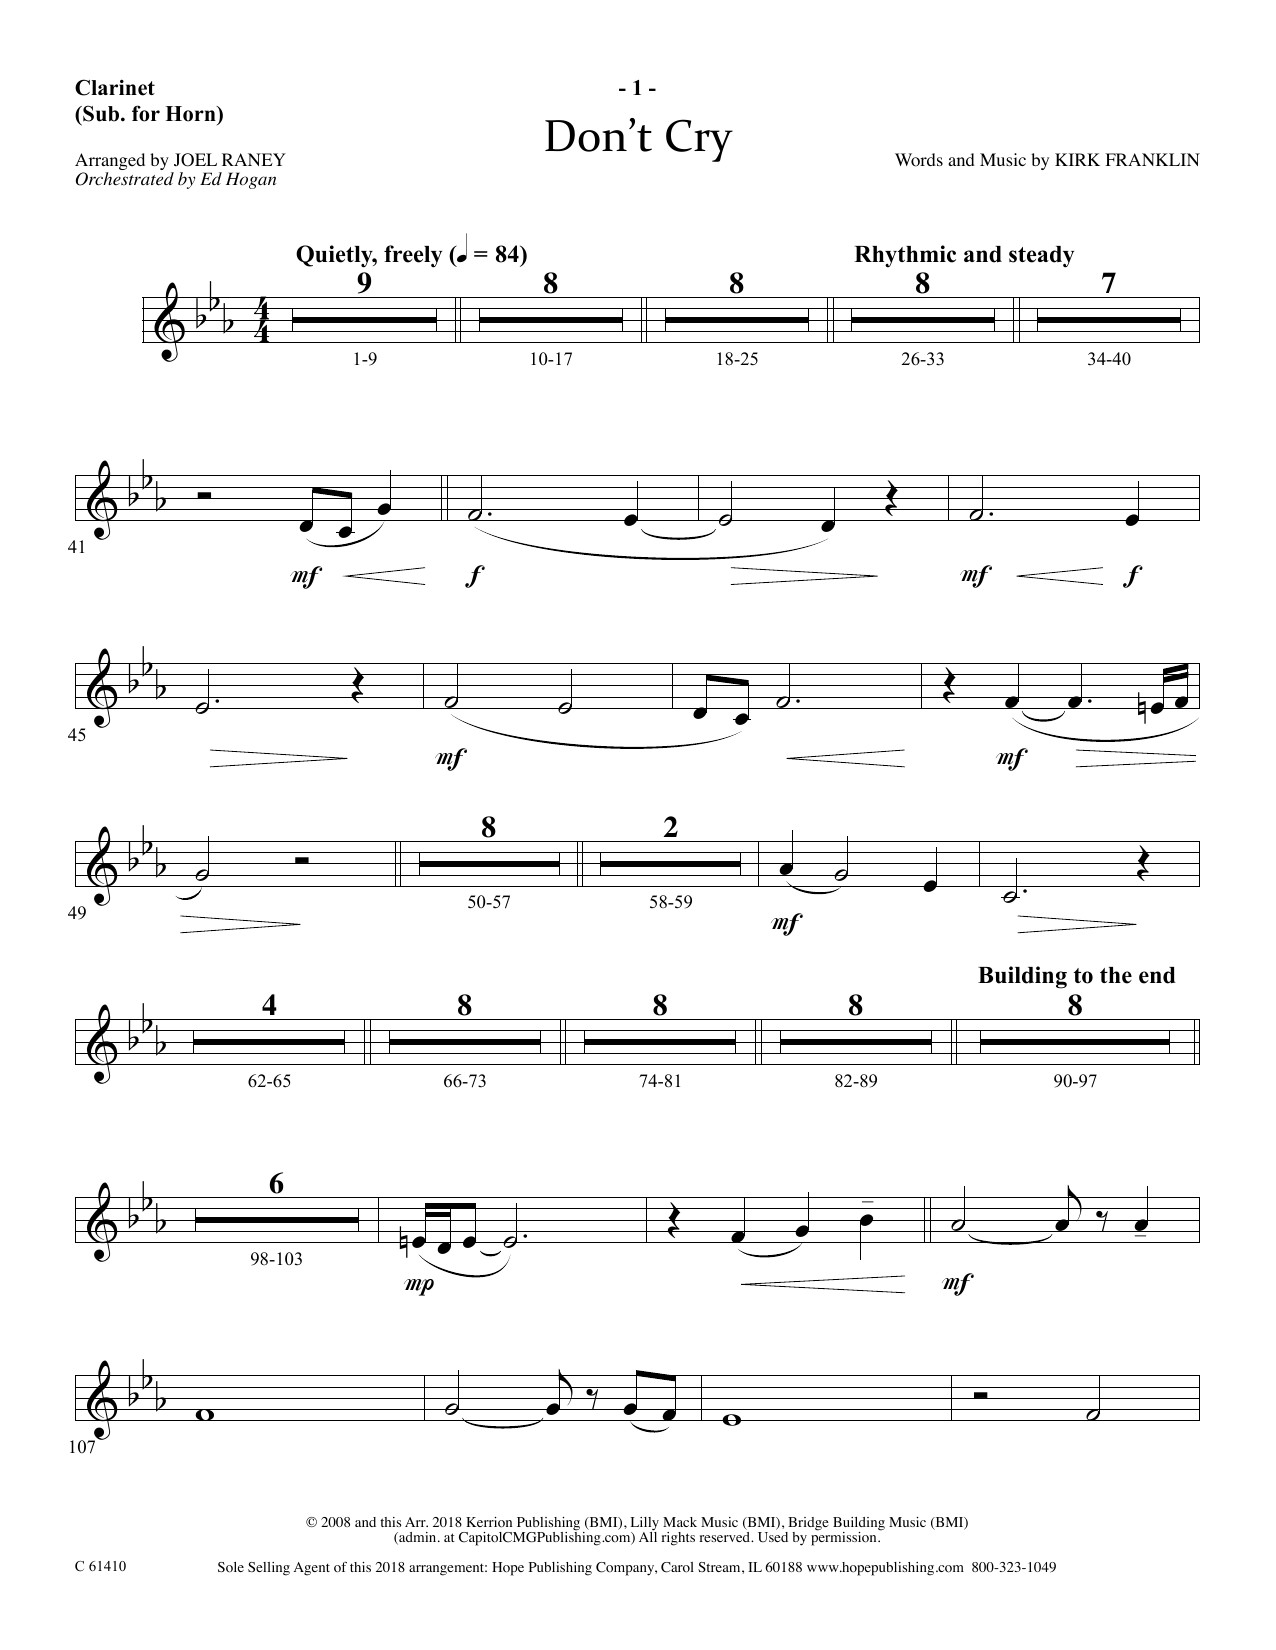 Download Joel Raney Don't Cry - Clarinet Sheet Music